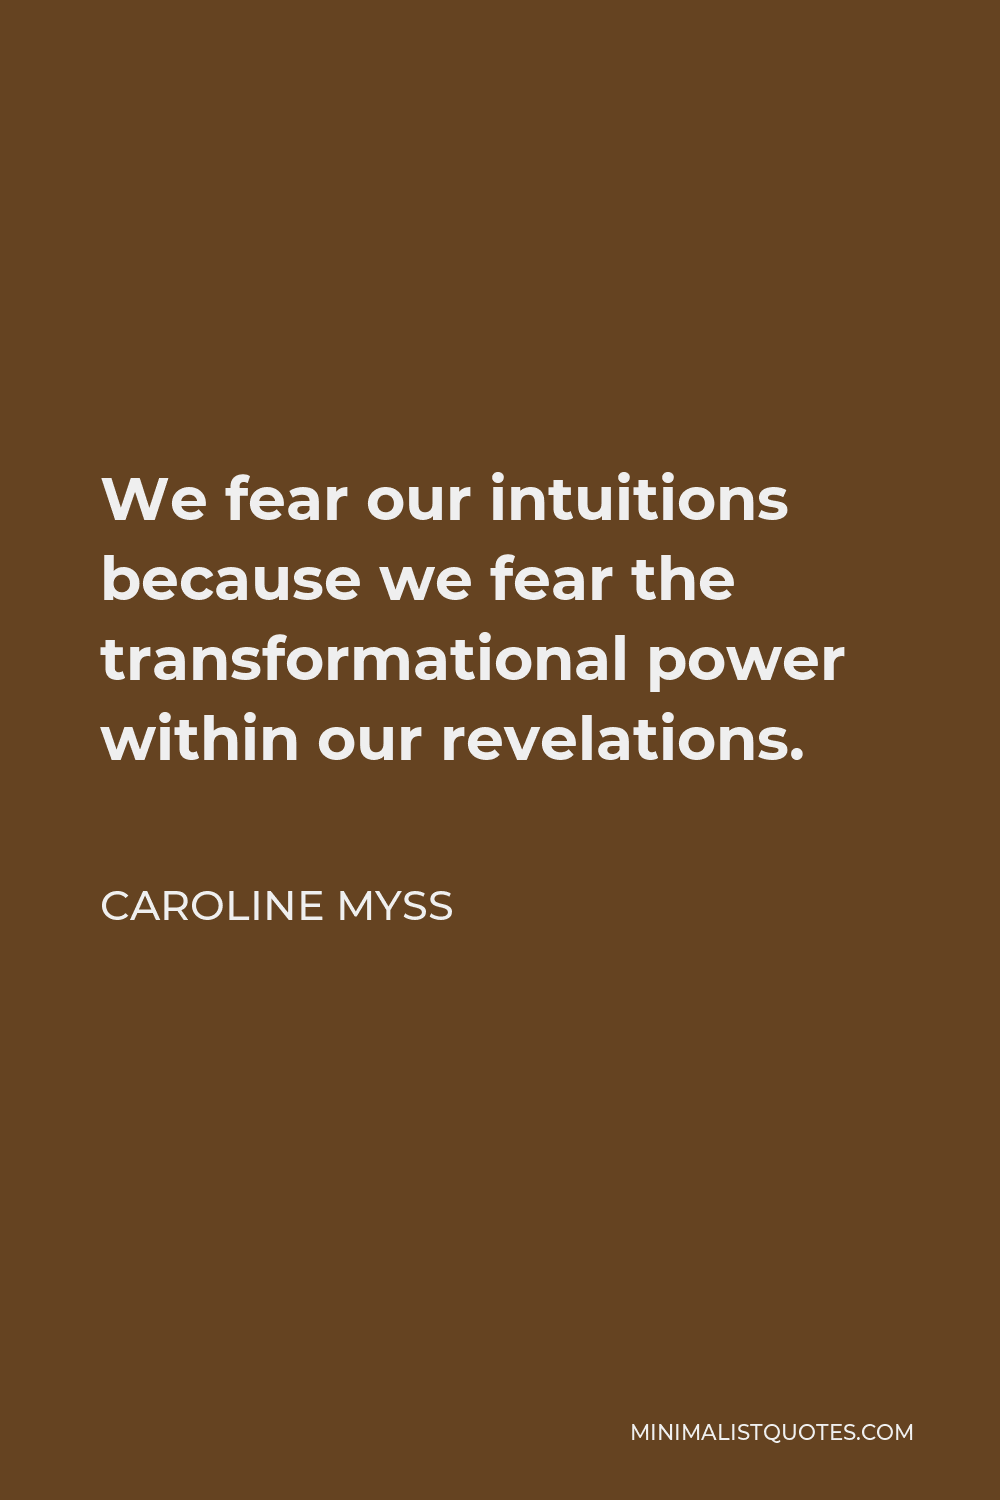 Caroline Myss Quote - We fear our intuitions because we fear the transformational power within our revelations.